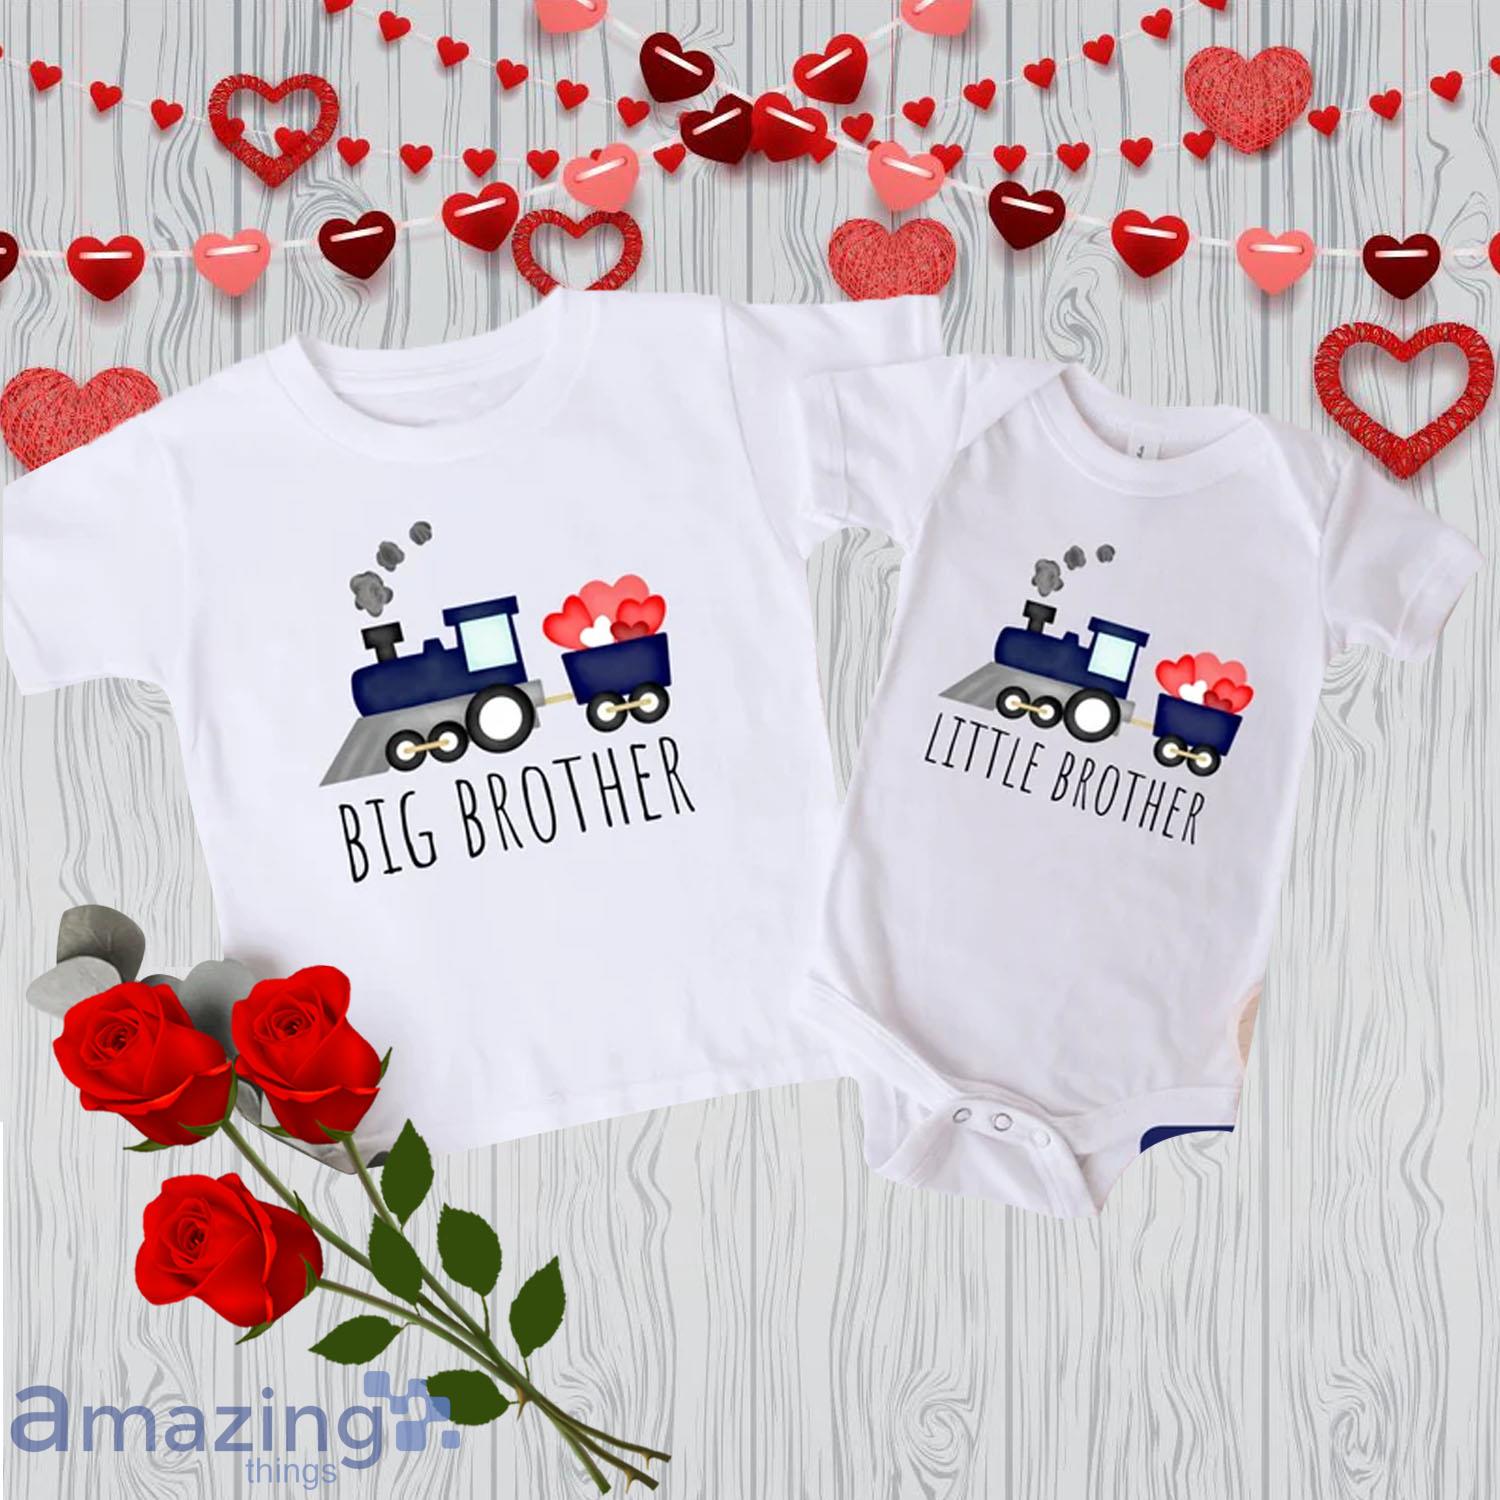 Best Gifts for Big Brother and Sister from the New Baby | Big sibling gifts,  Big sister gifts, Big brother gift